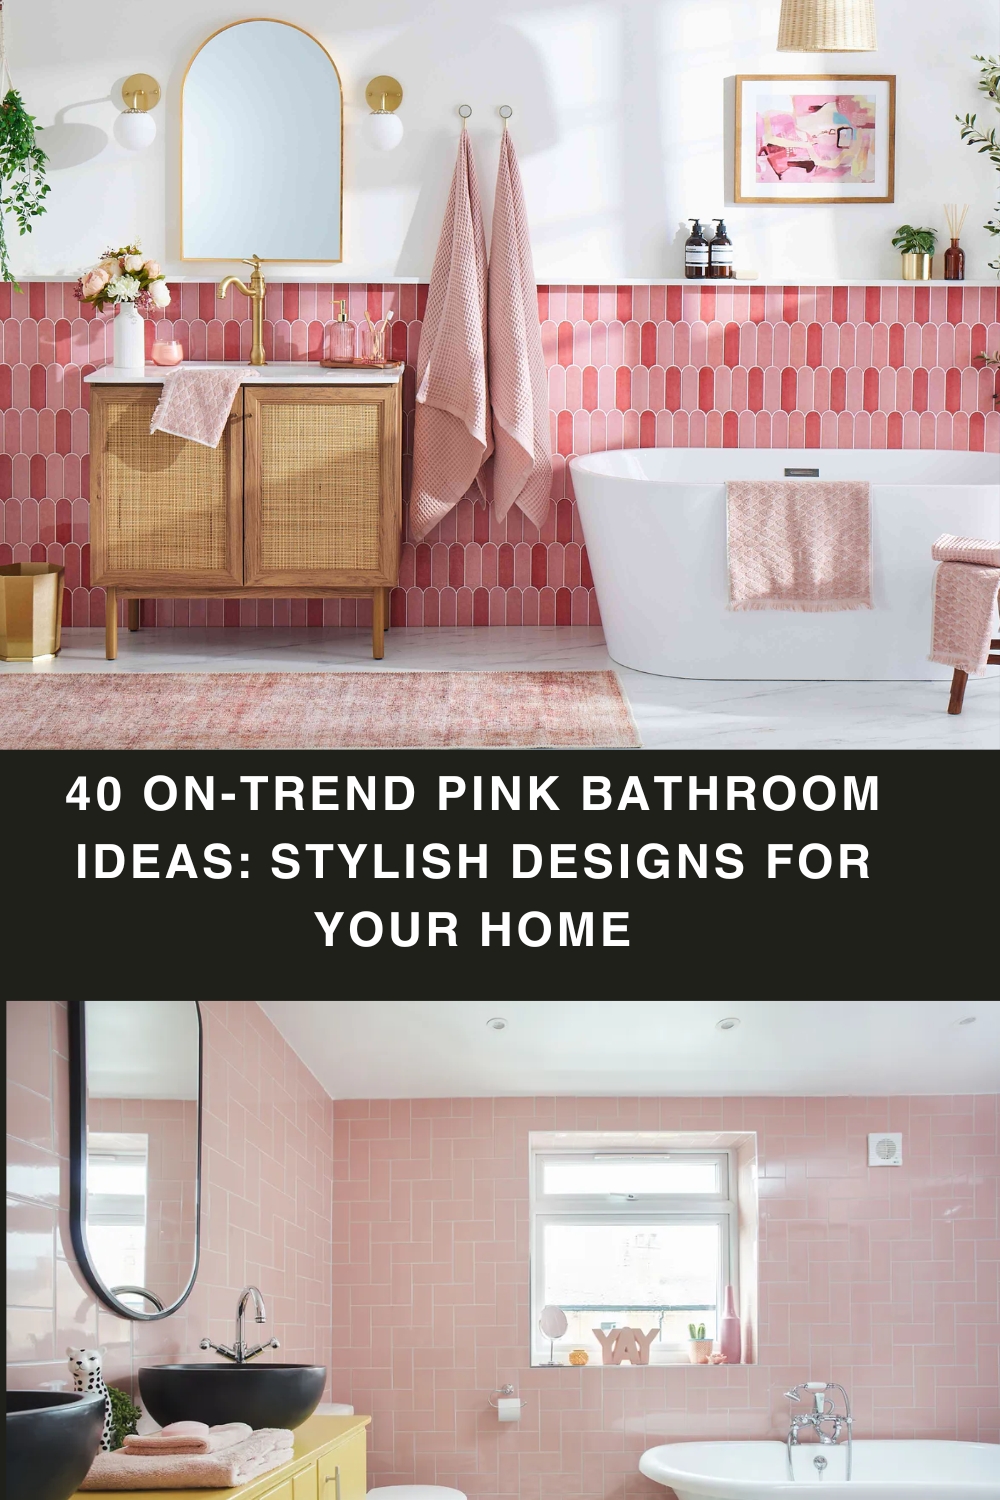 40 On-Trend Pink Bathroom Ideas: Stylish Designs for Your Home pin